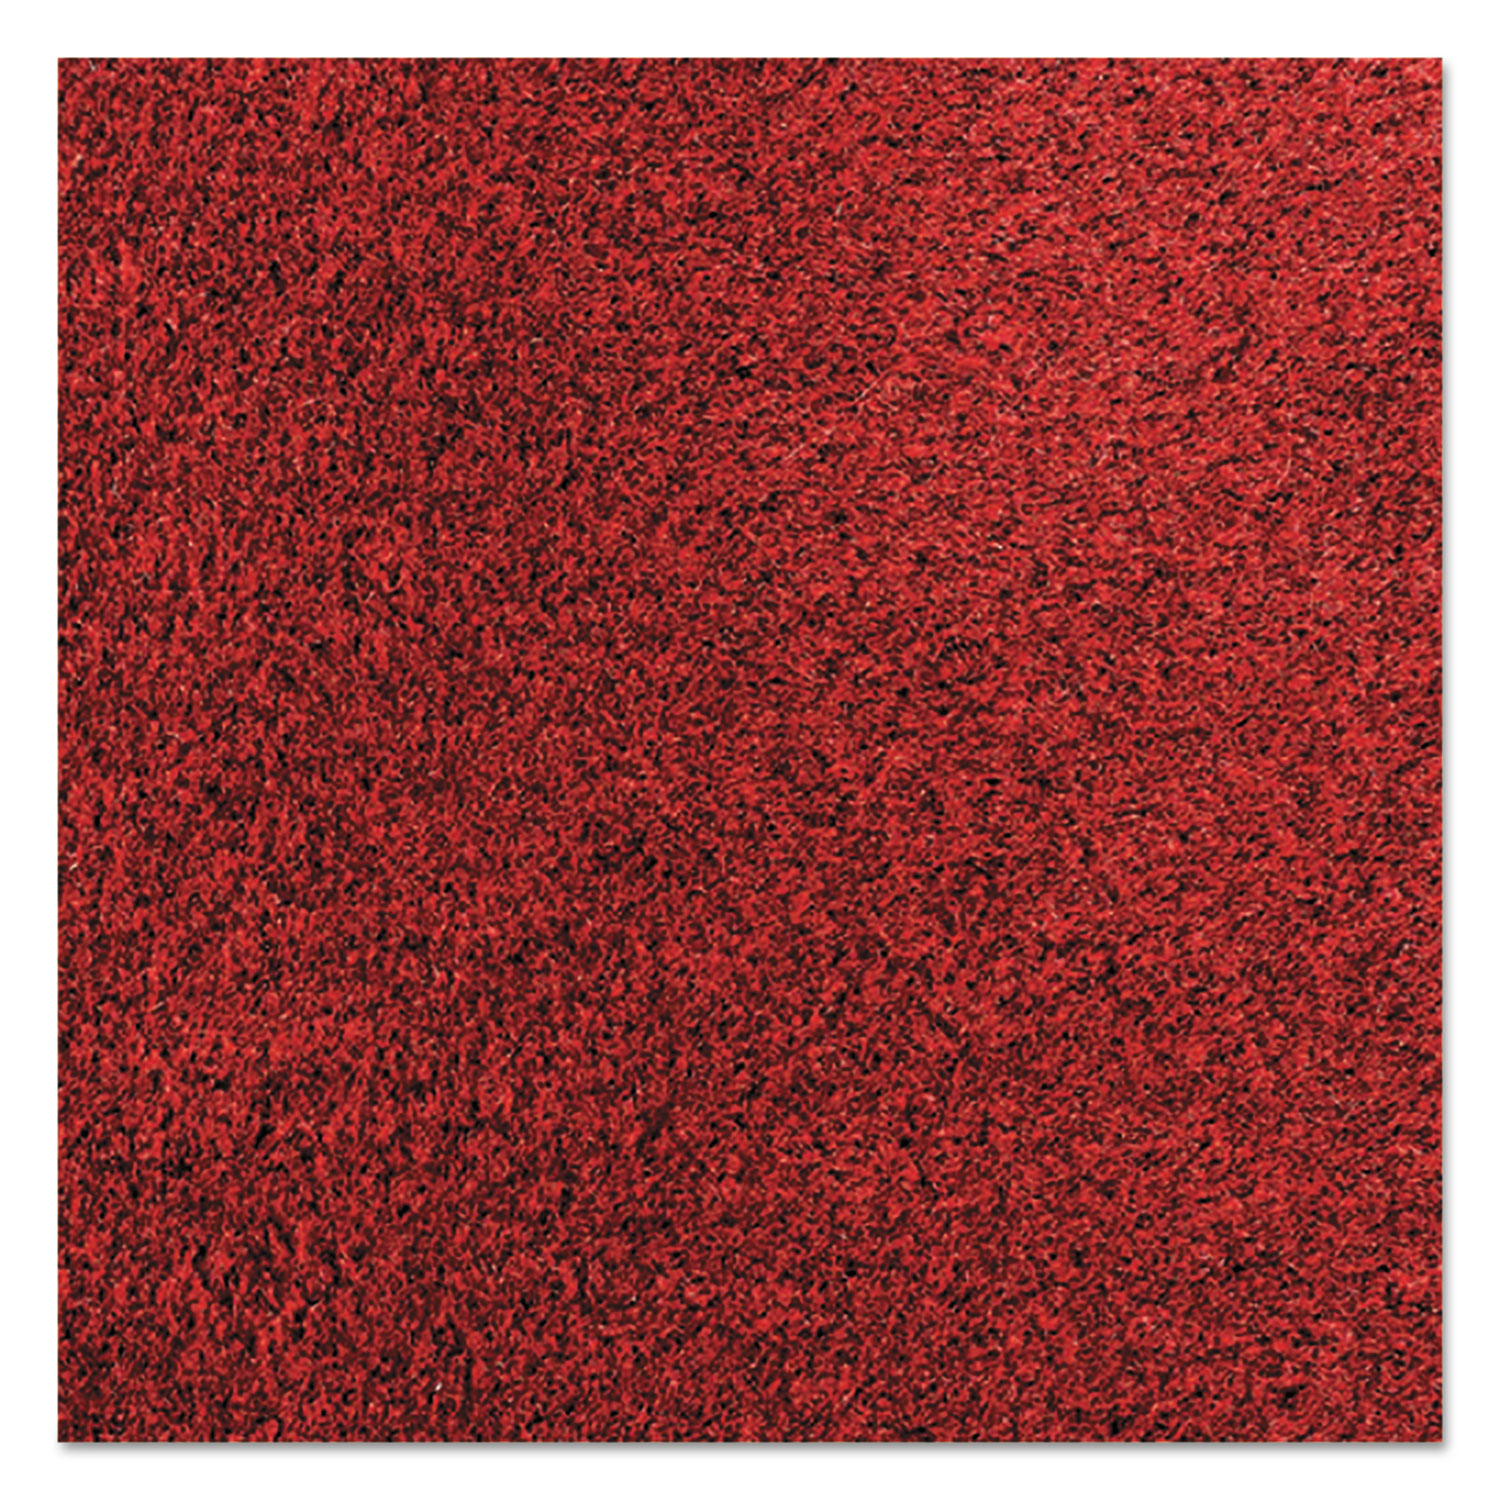  Crown GS 0310CR Rely-On Olefin Indoor Wiper Mat, 36 x 120, Castellan Red (CWNGS0310CR) 